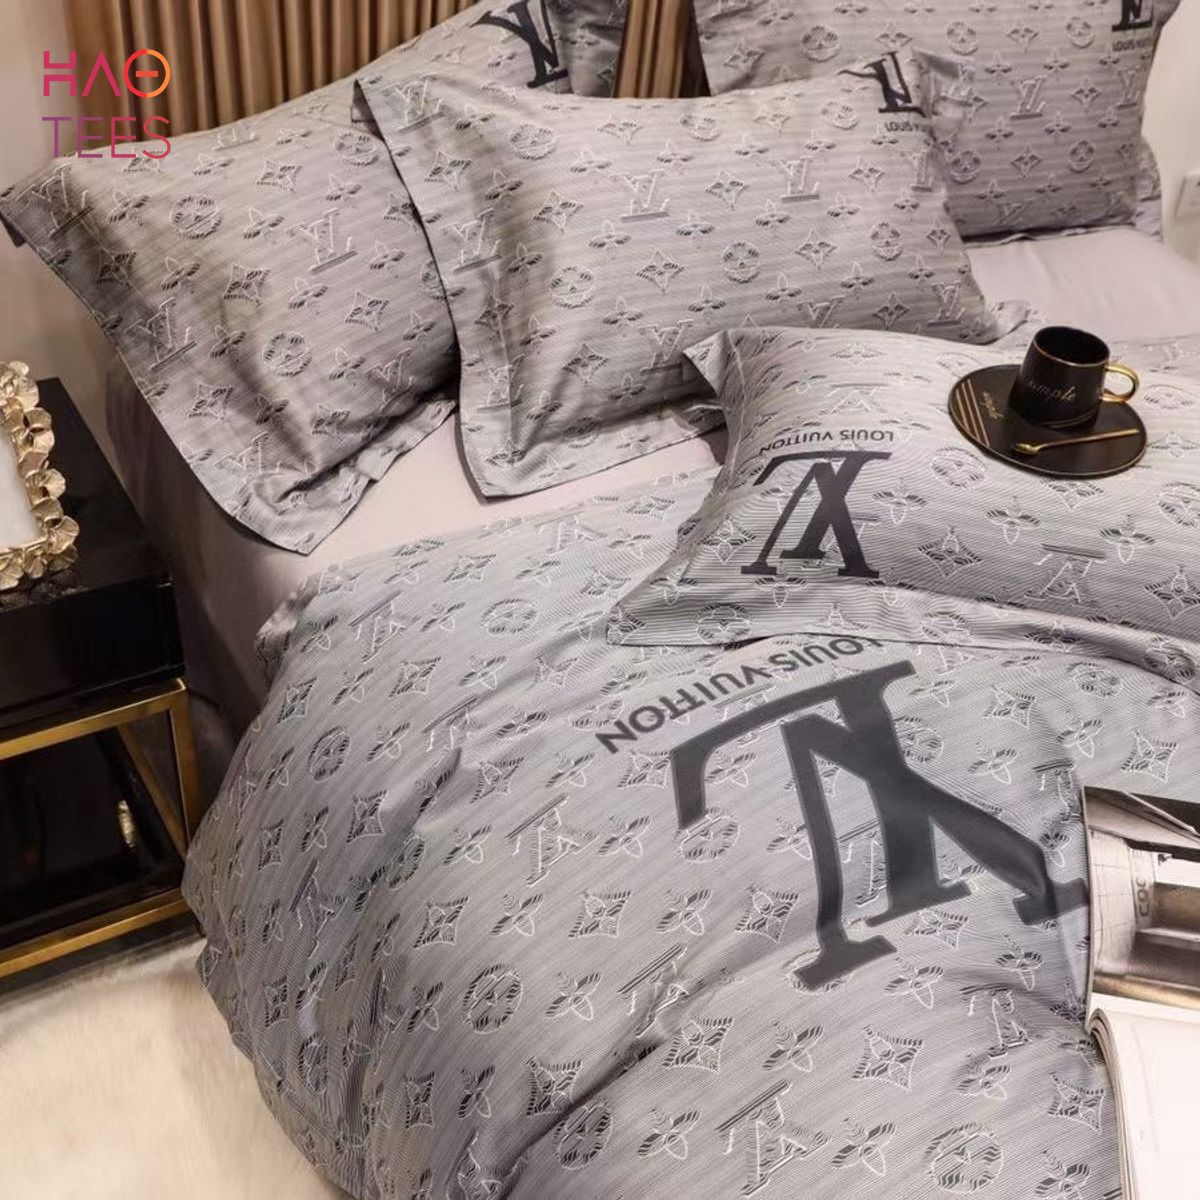 AVAILABLE] Louis Vuitton Gray Luxury Brand Bedding Sets Limited